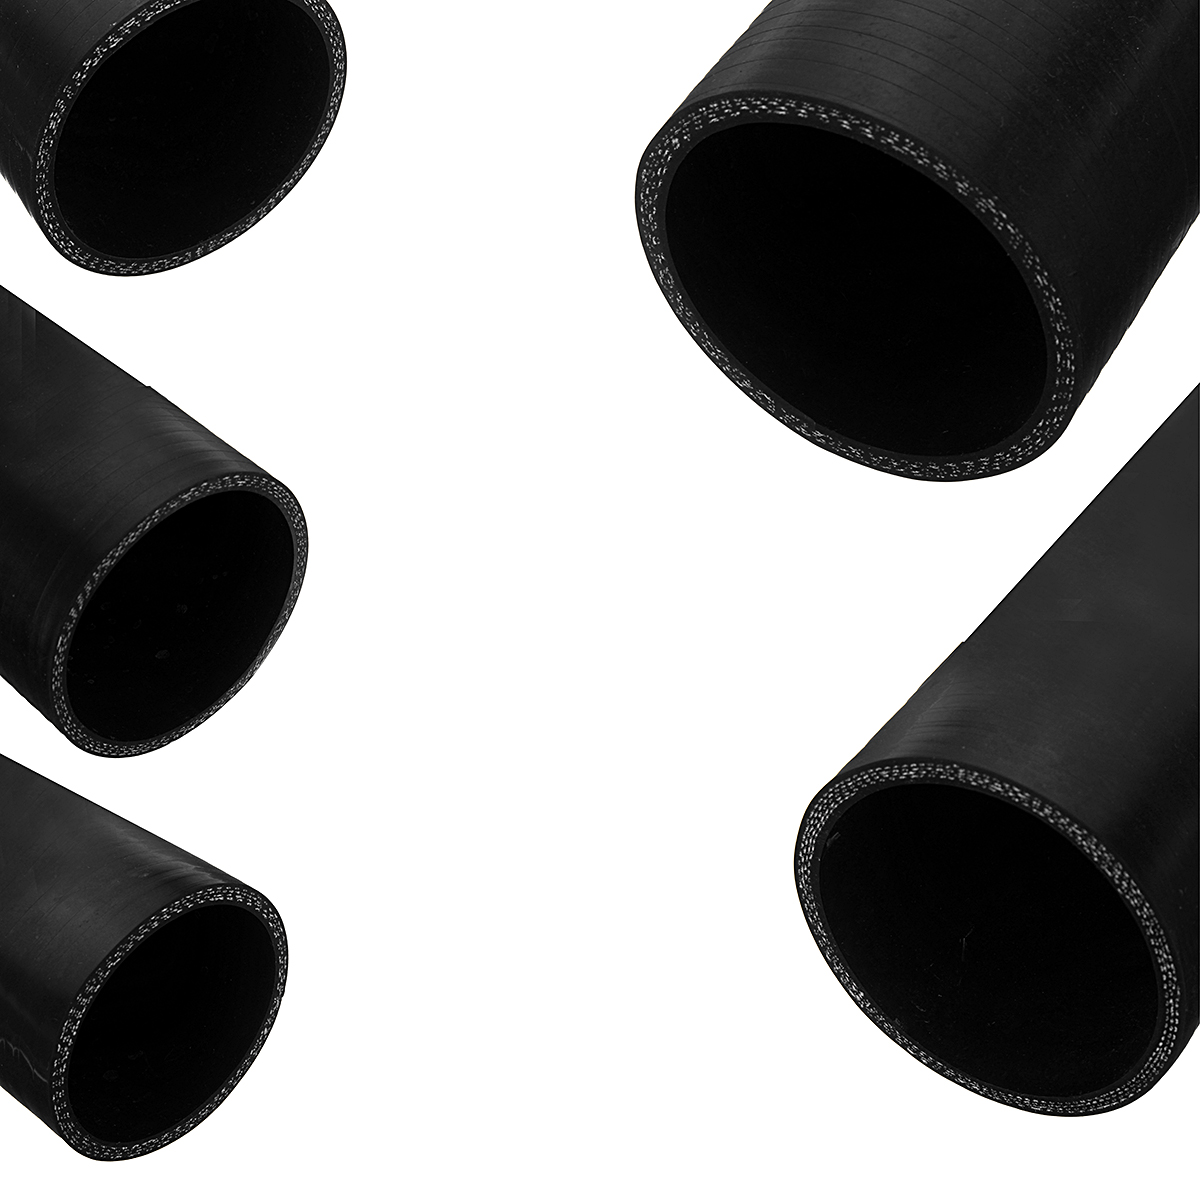 150mm-Black-Silicone-Hose-Rubber-15-Degree-Elbow-Bend-Hose-Air-Water-Coolant-Joiner-Pipe-Tube-1591449-1